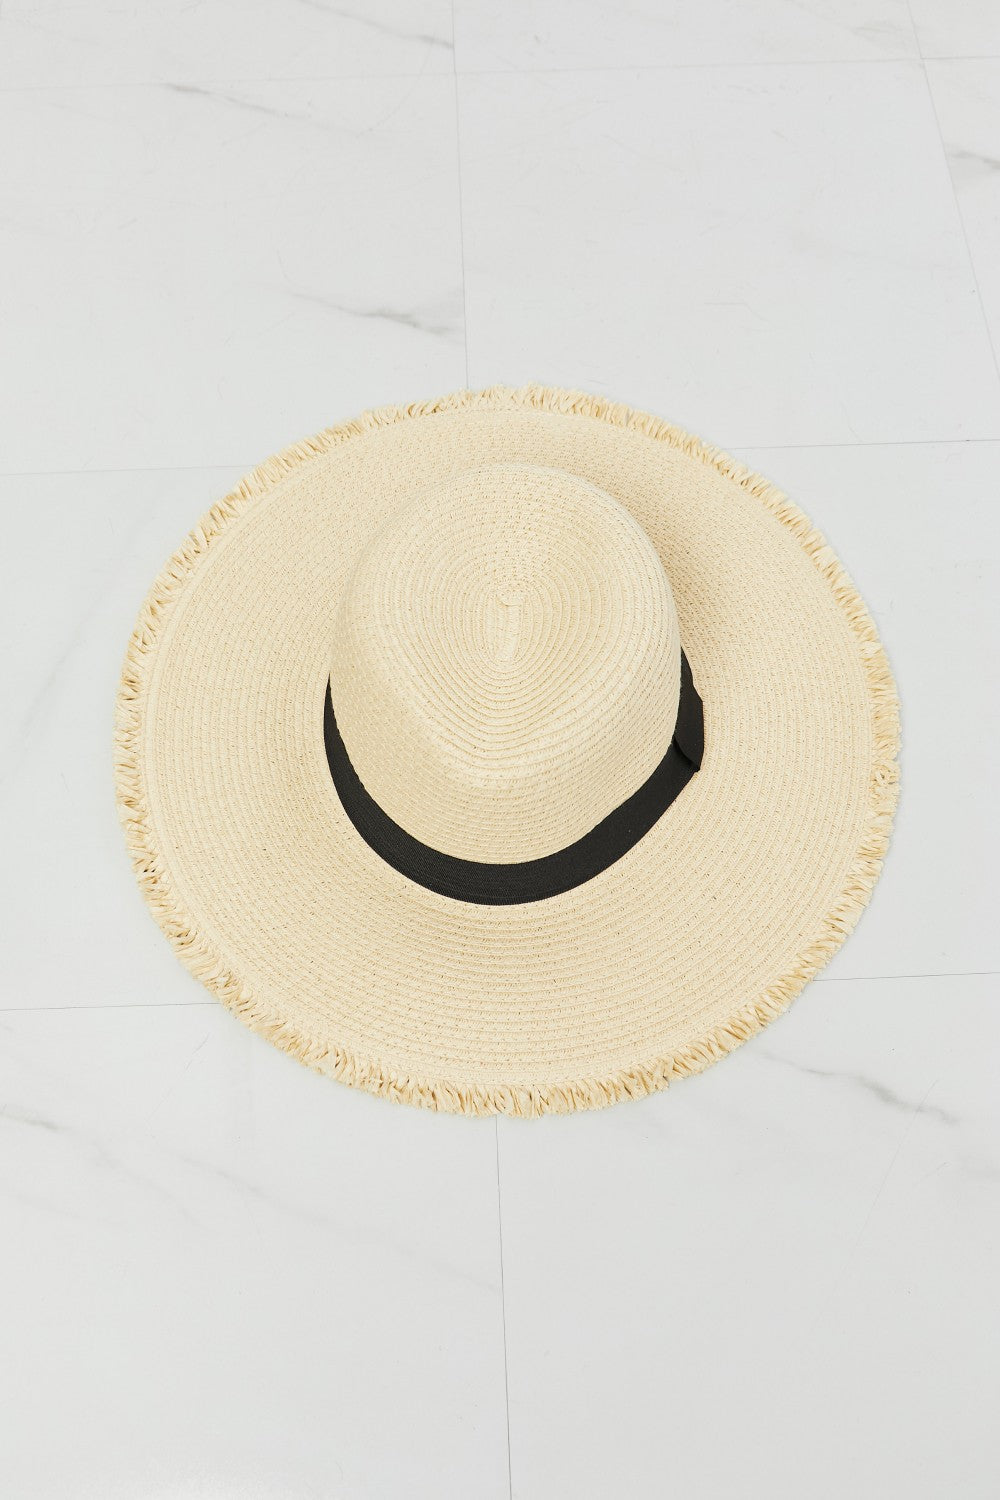 Fame Time For The Sun Straw Hat - Tigbul's Fashion